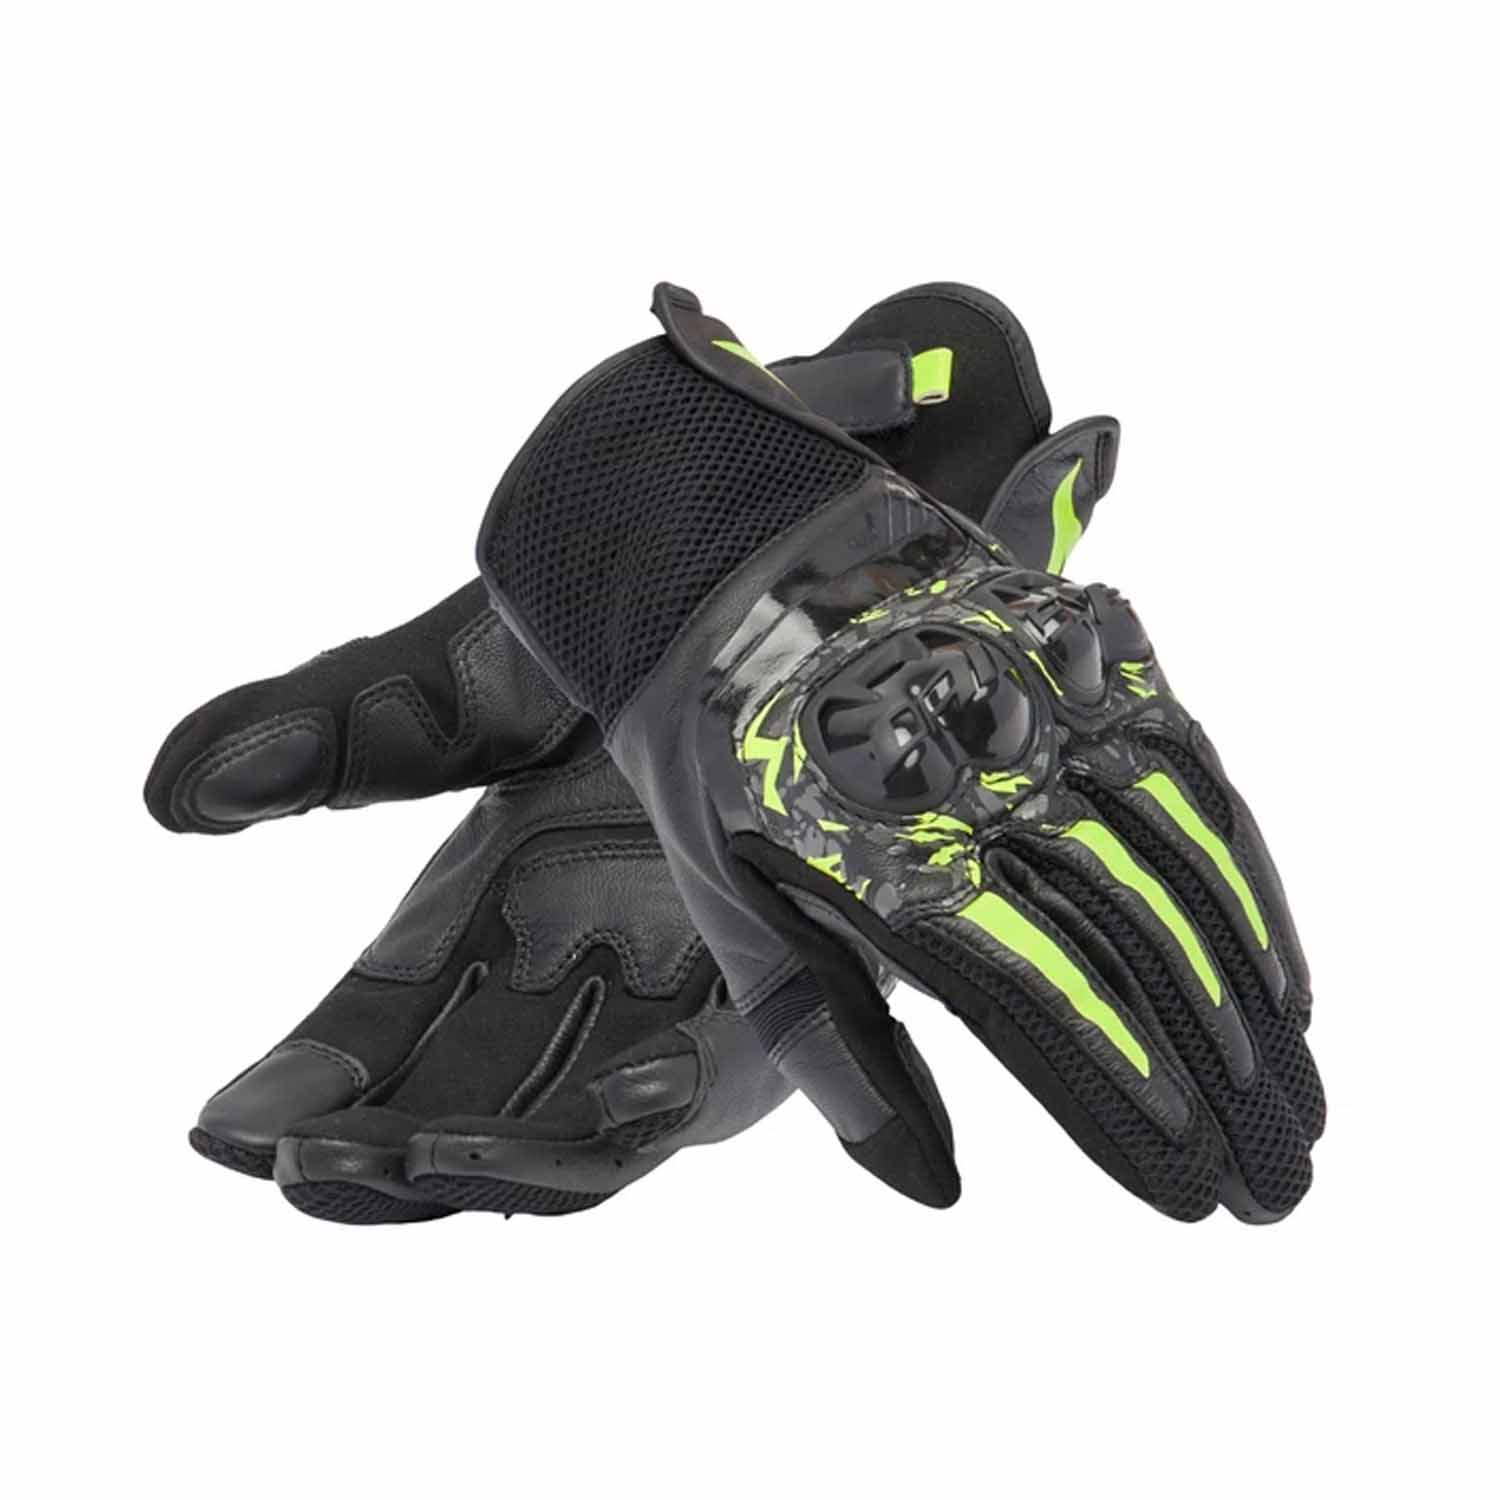 Image of Dainese MIG 3 Gloves Black Anthracite Yellow Fluo Size M EN